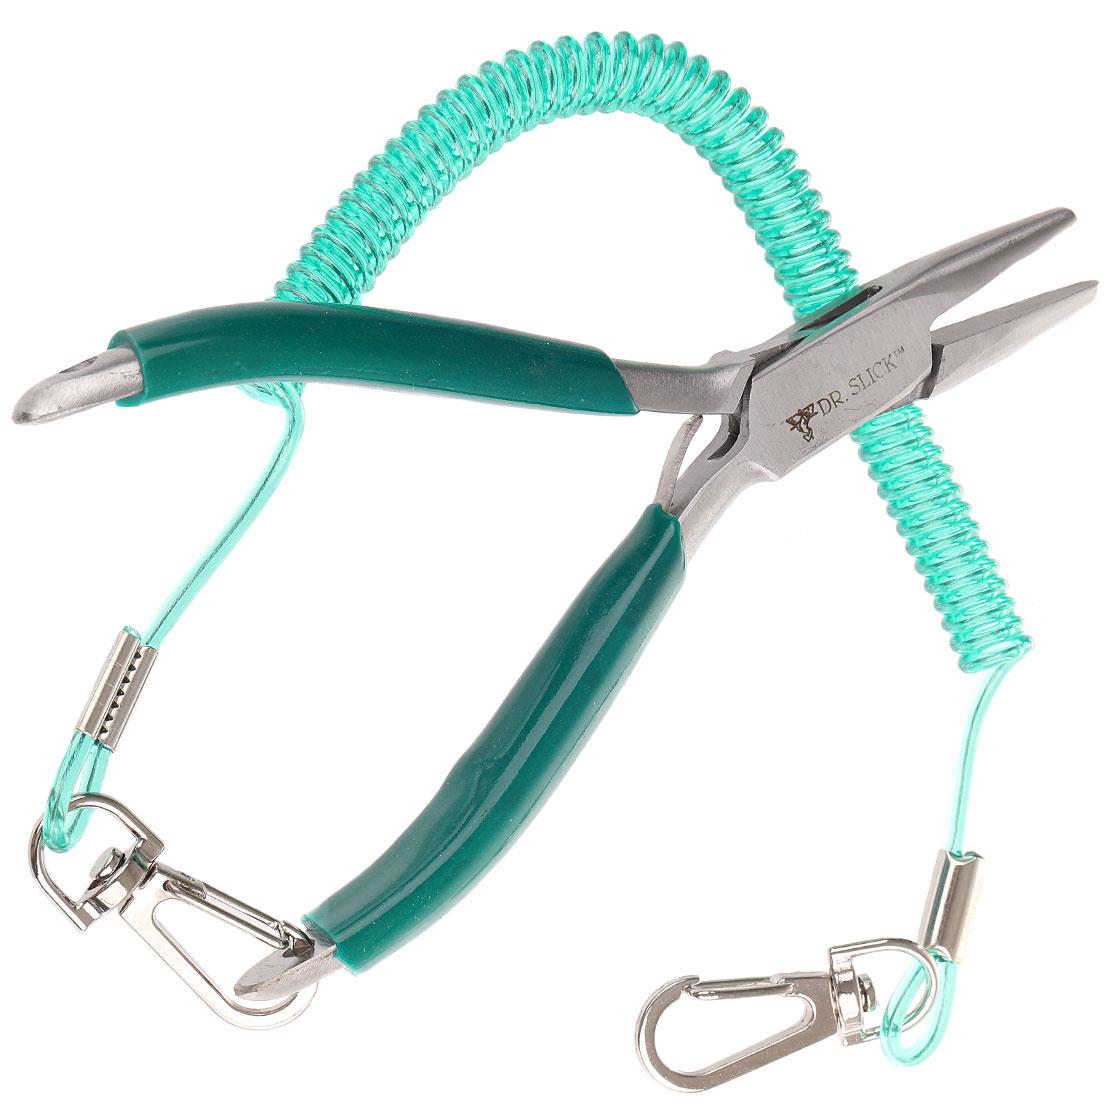 Dr. Slick Barb Plier Satin, Pincers and Hook Pliers